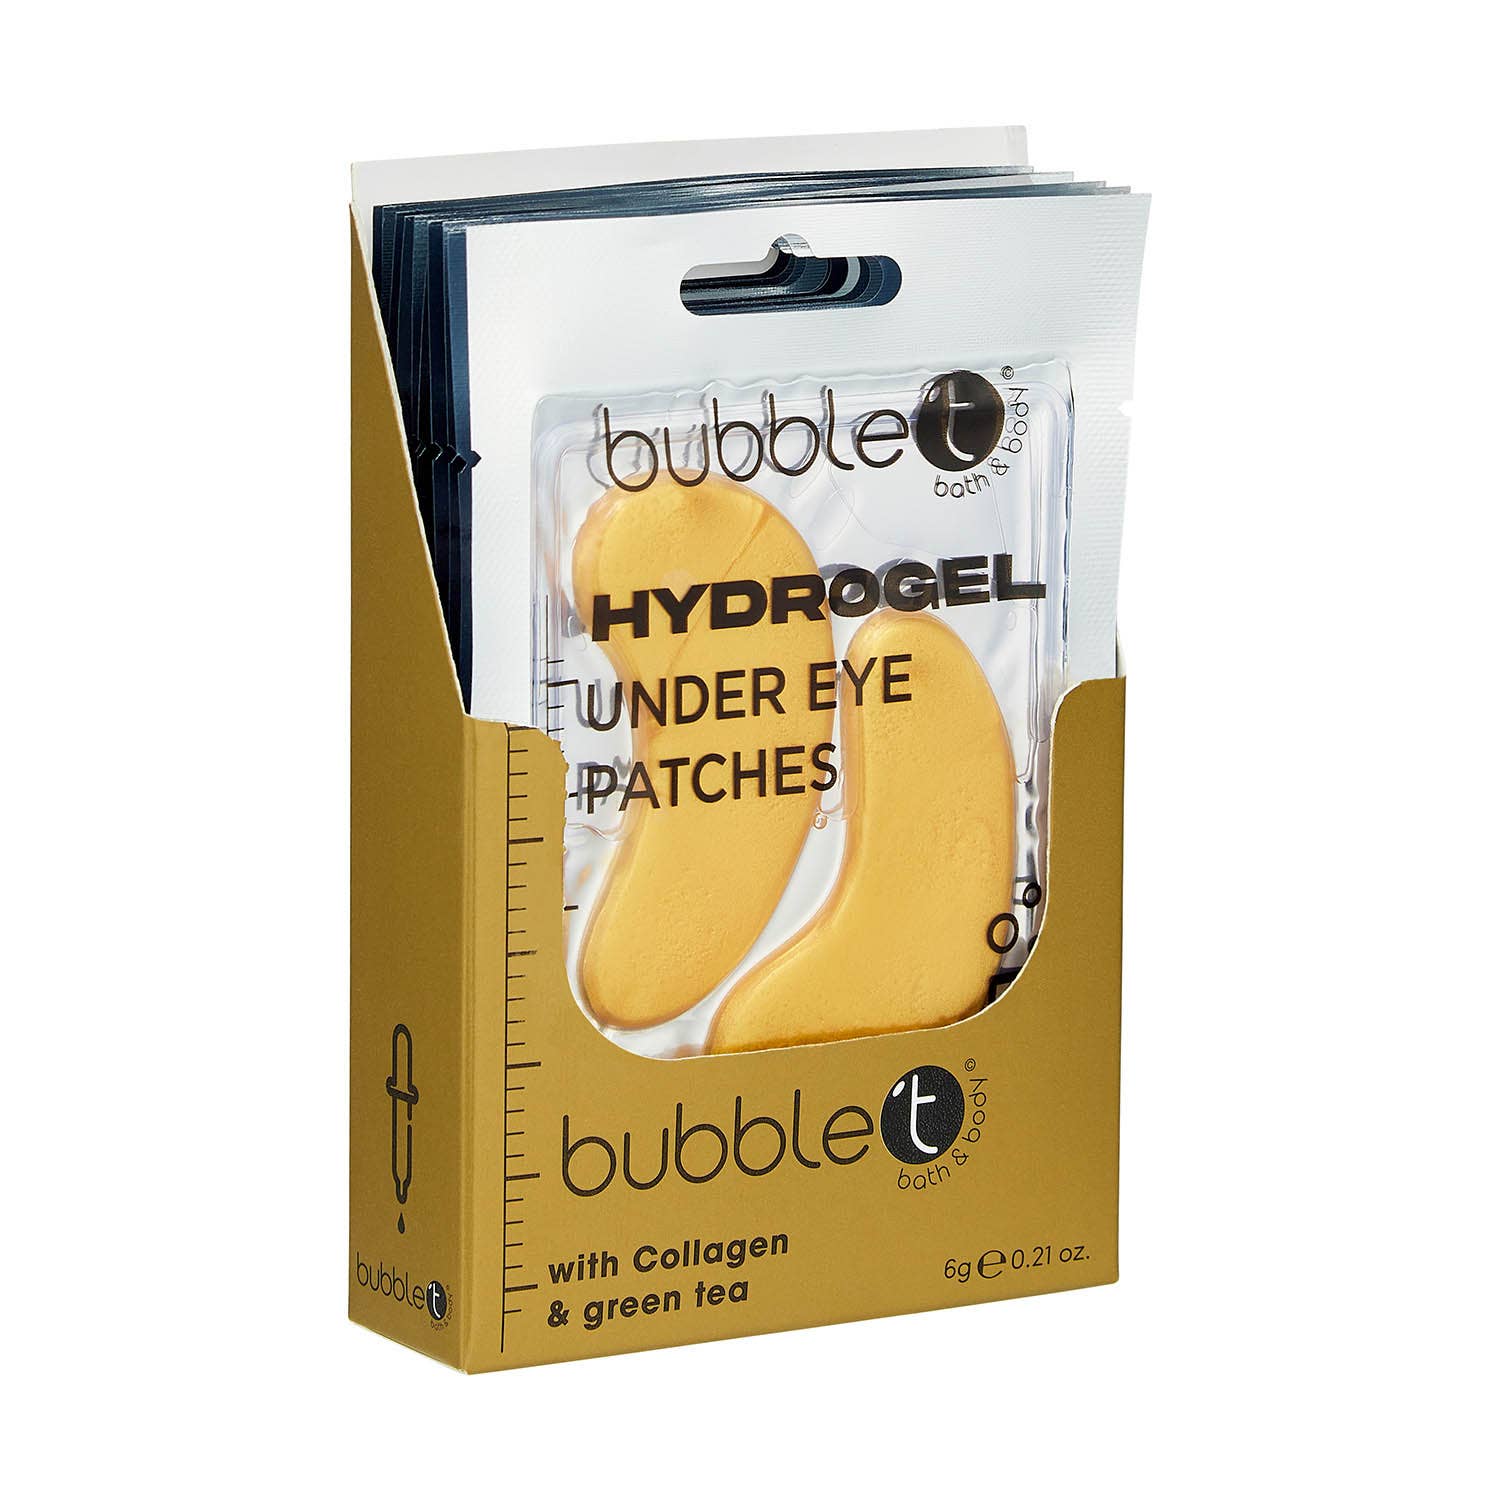 Bubble T Cosmetics Hydrogel Under Eye Patches - Collagen & Green Tea